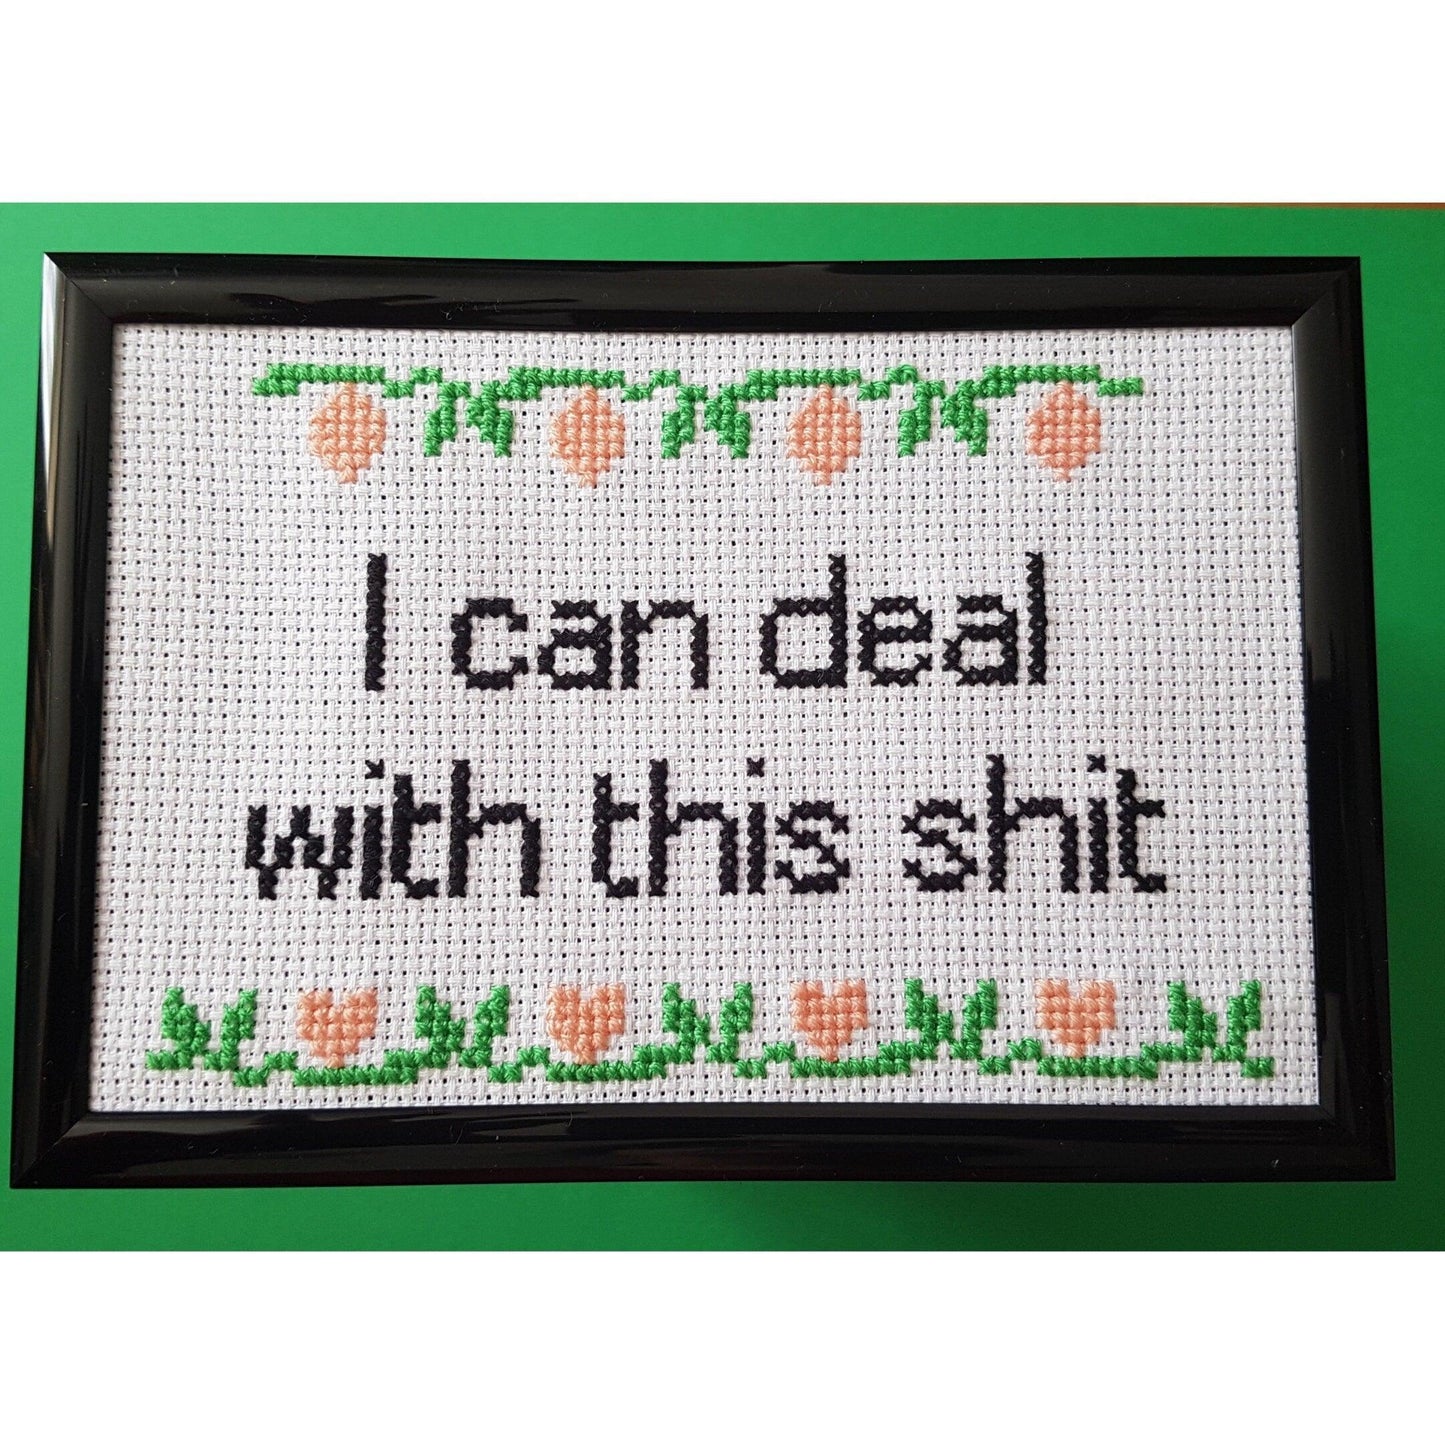 I can deal with this shit, completed cross stitch quote